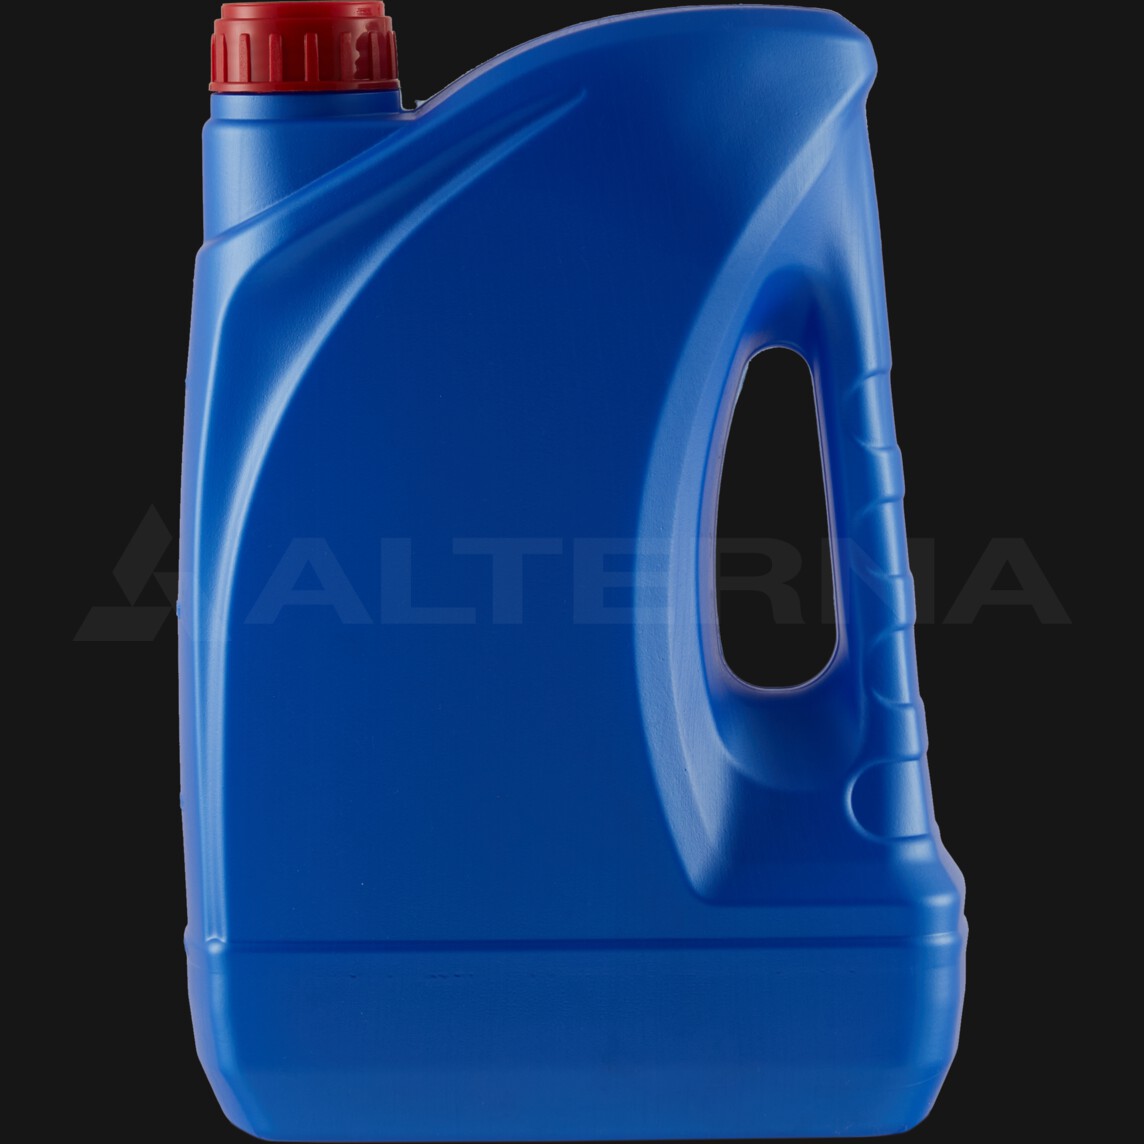 5 Liter HDPE Motor Oil Jerry Can with 50 mm Alu. Seal Cap